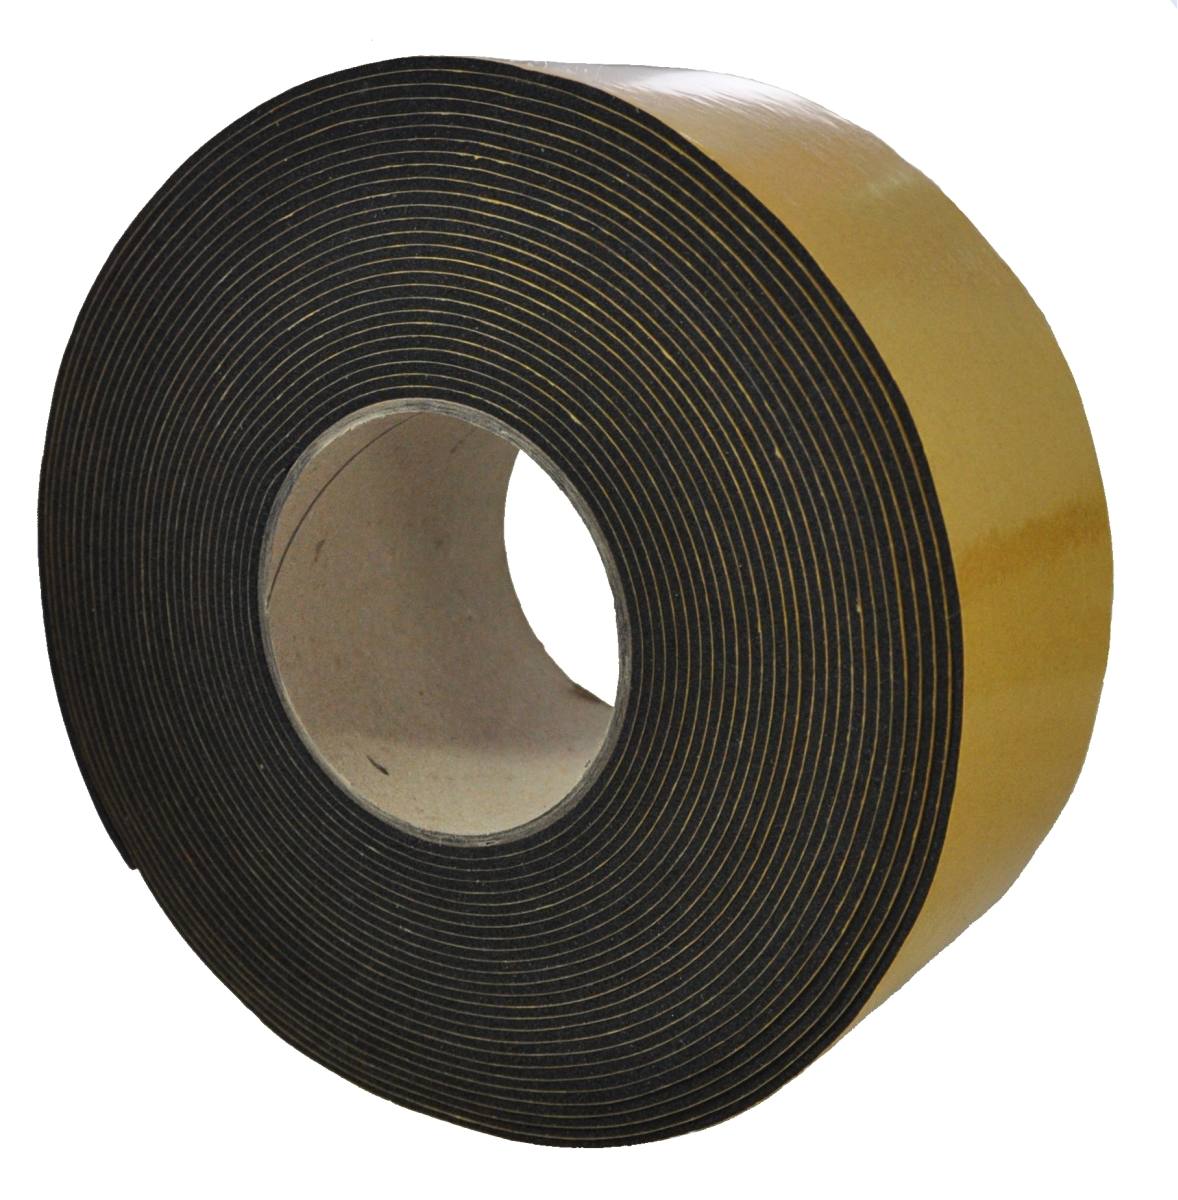 S-K-S EPDM 3mmx9mmx10m black self-adhesive on one side